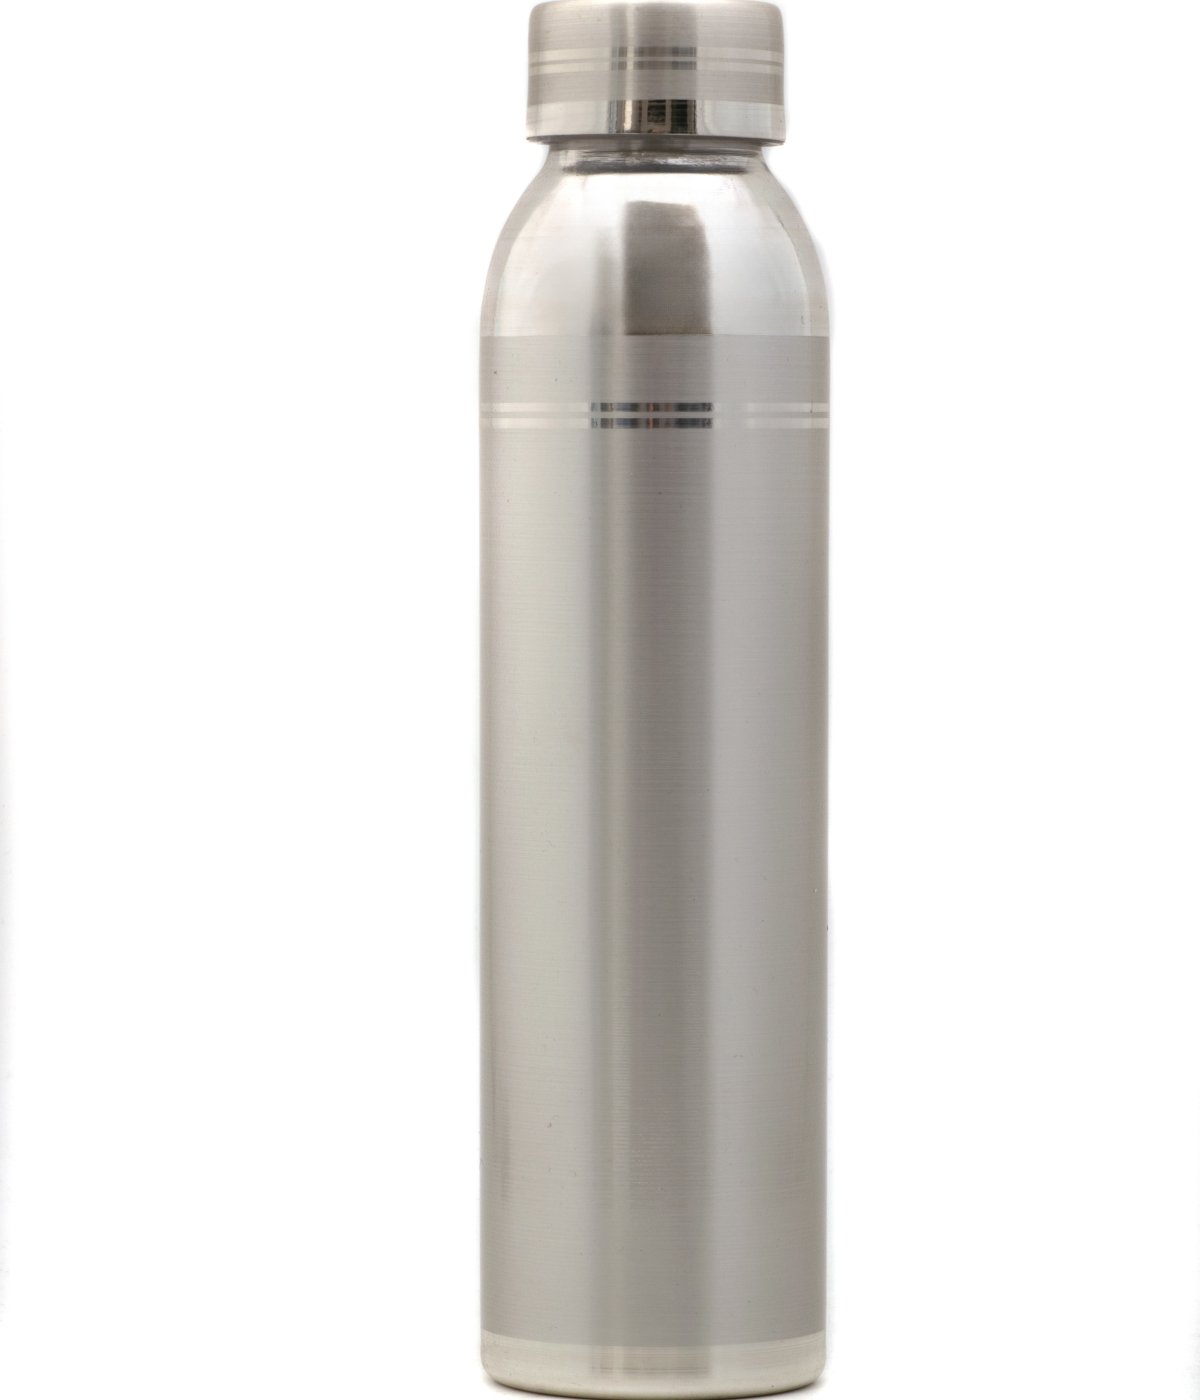 92.5 SILVER WATER BOTTLE FOR 4 SERVING 